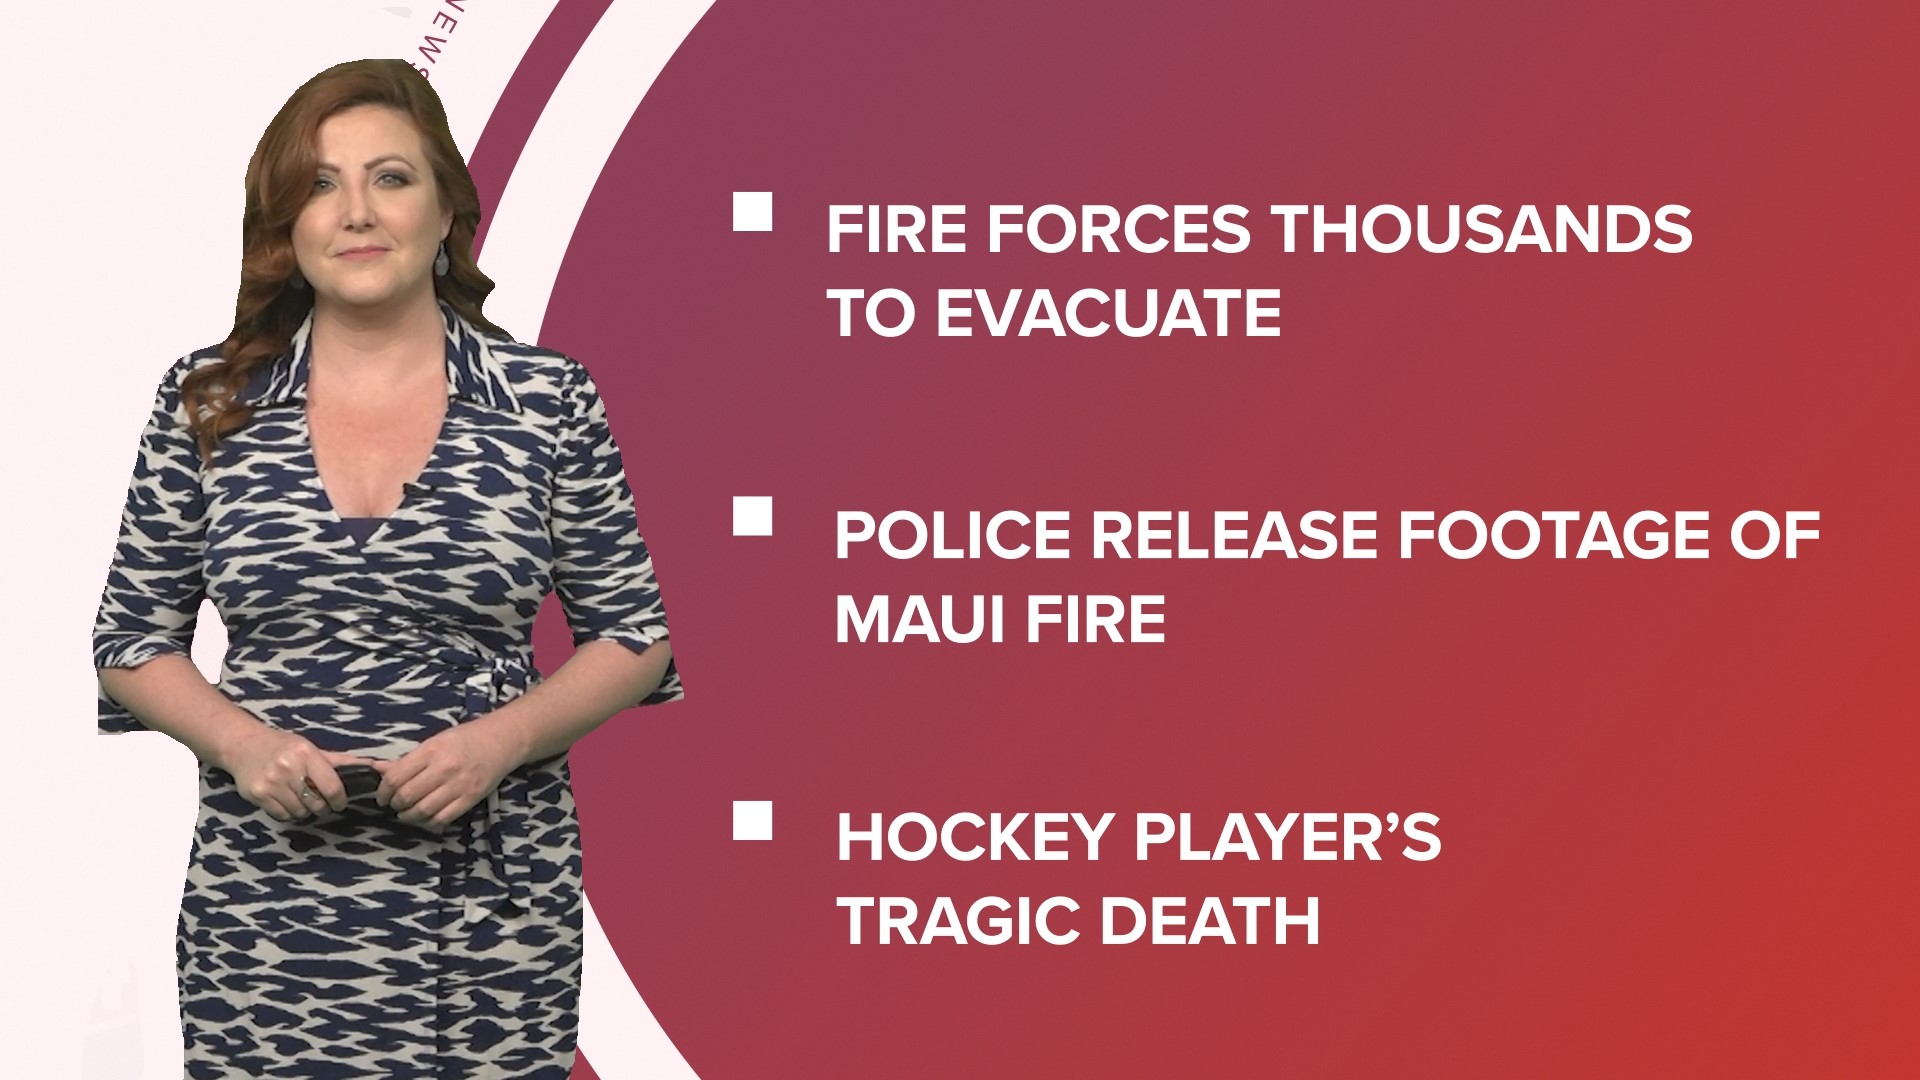 A look at what is happening in the news from a wildfire in California to new footage of the Maui wildfires and temperatures plummet in areas of the U.S.